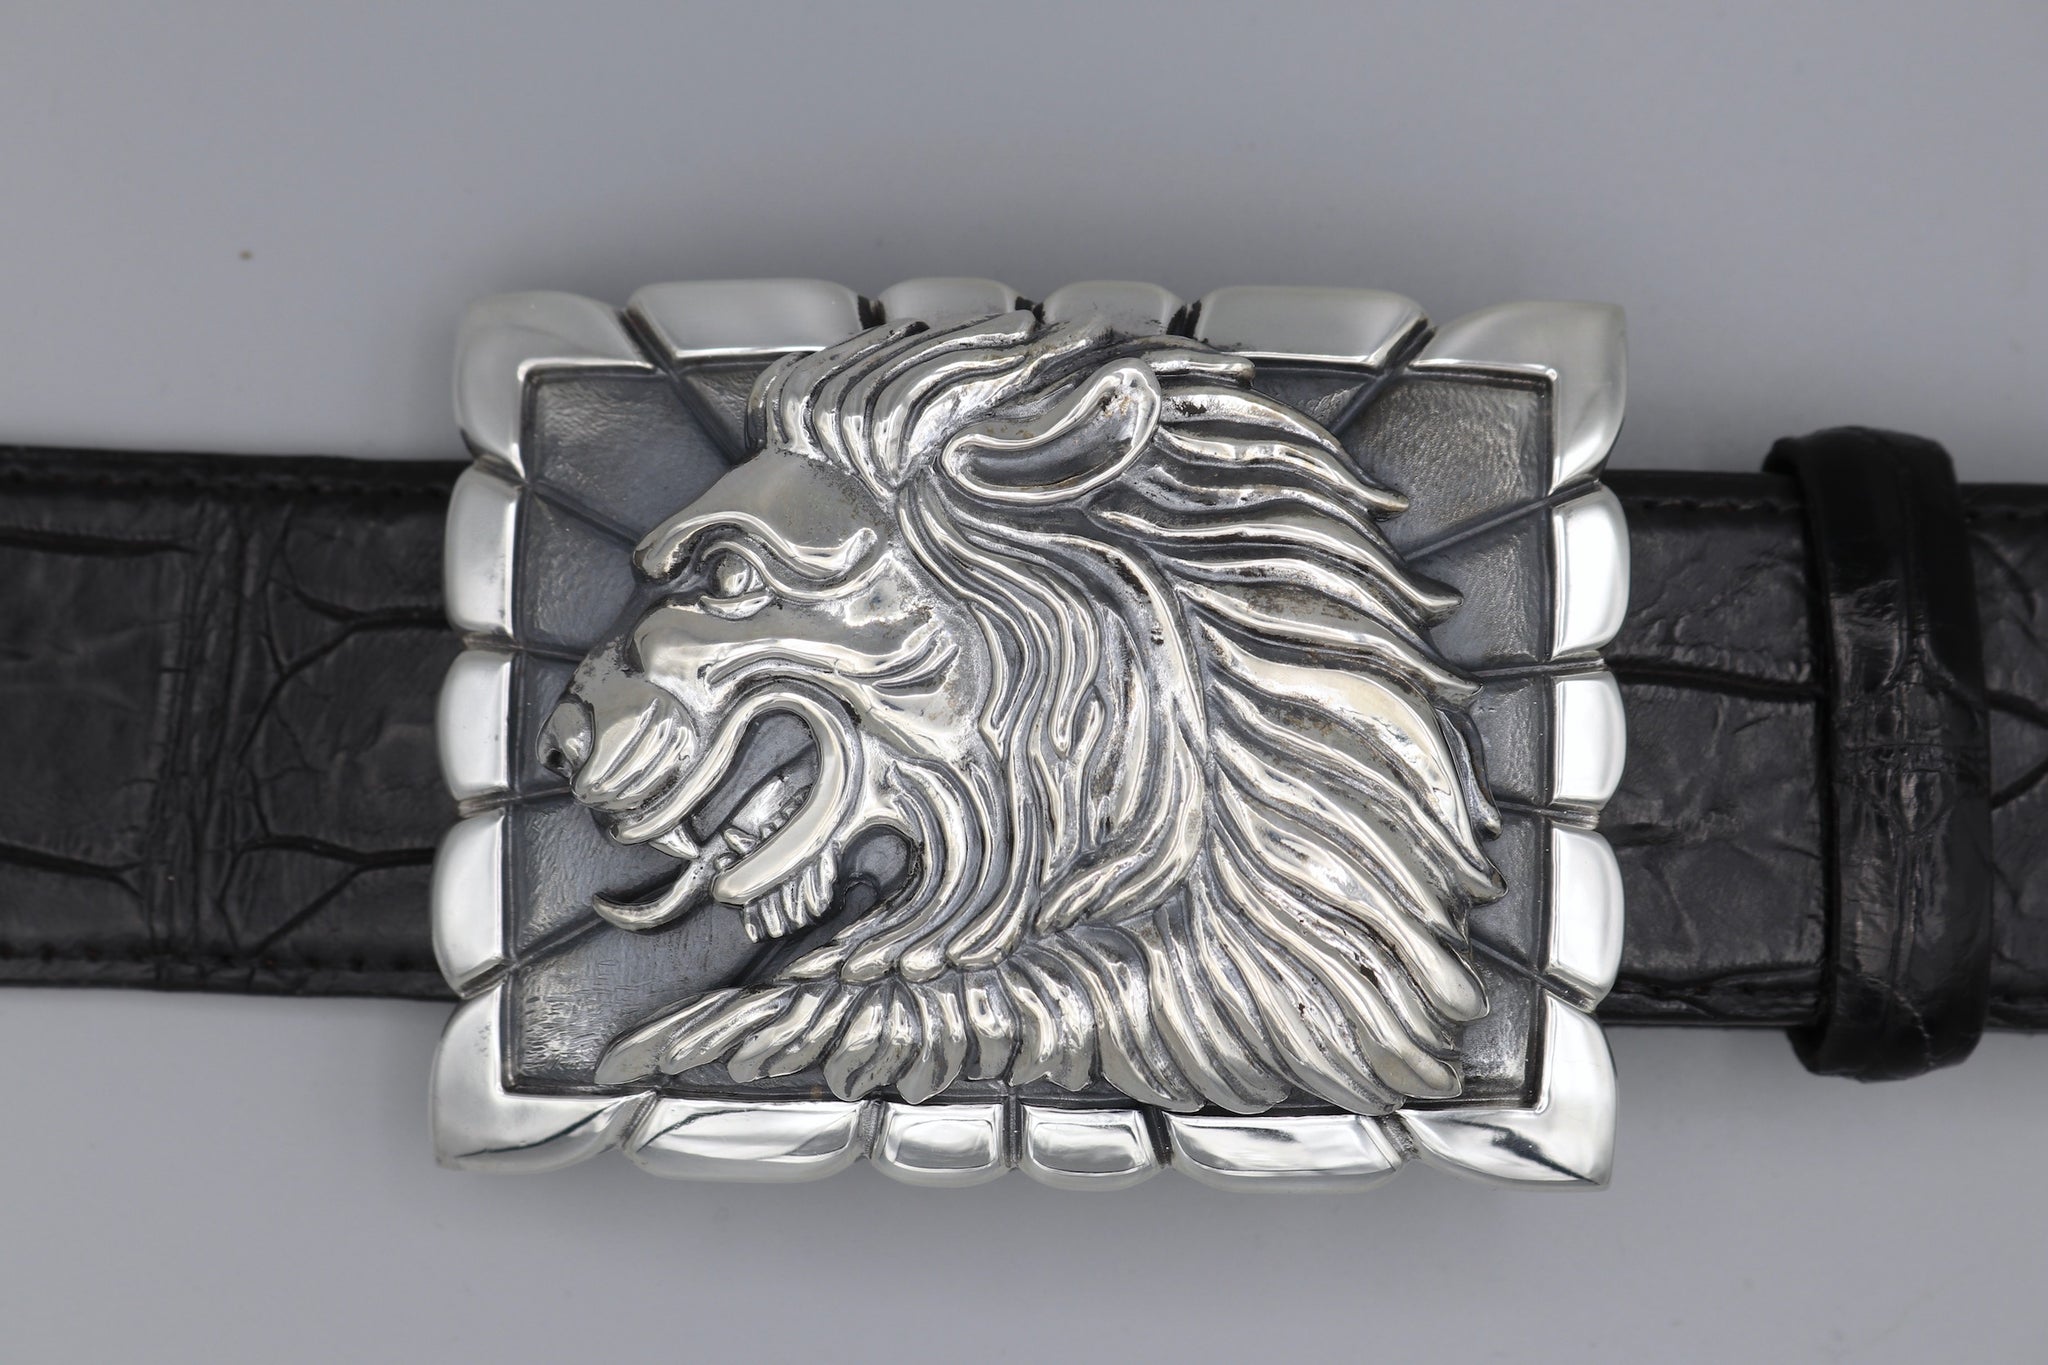 Tiger Belt Buckle | Mimosa Handcrafted Sterling Silver